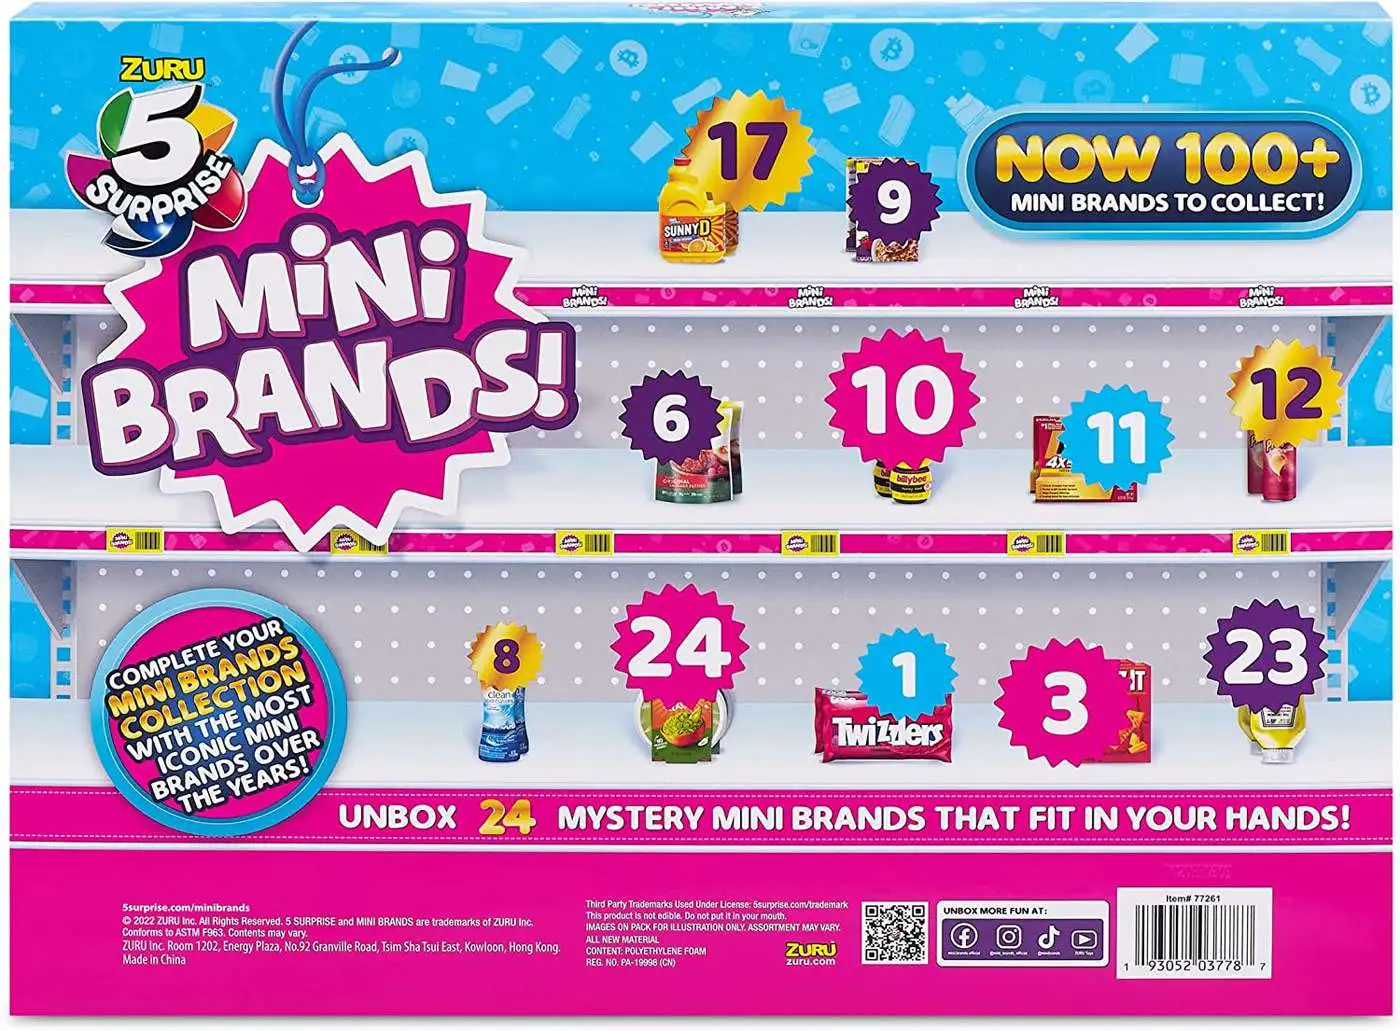 Part 2: Days 13-24 of the $15 Mini Brands Advent Calendar from 5 Below